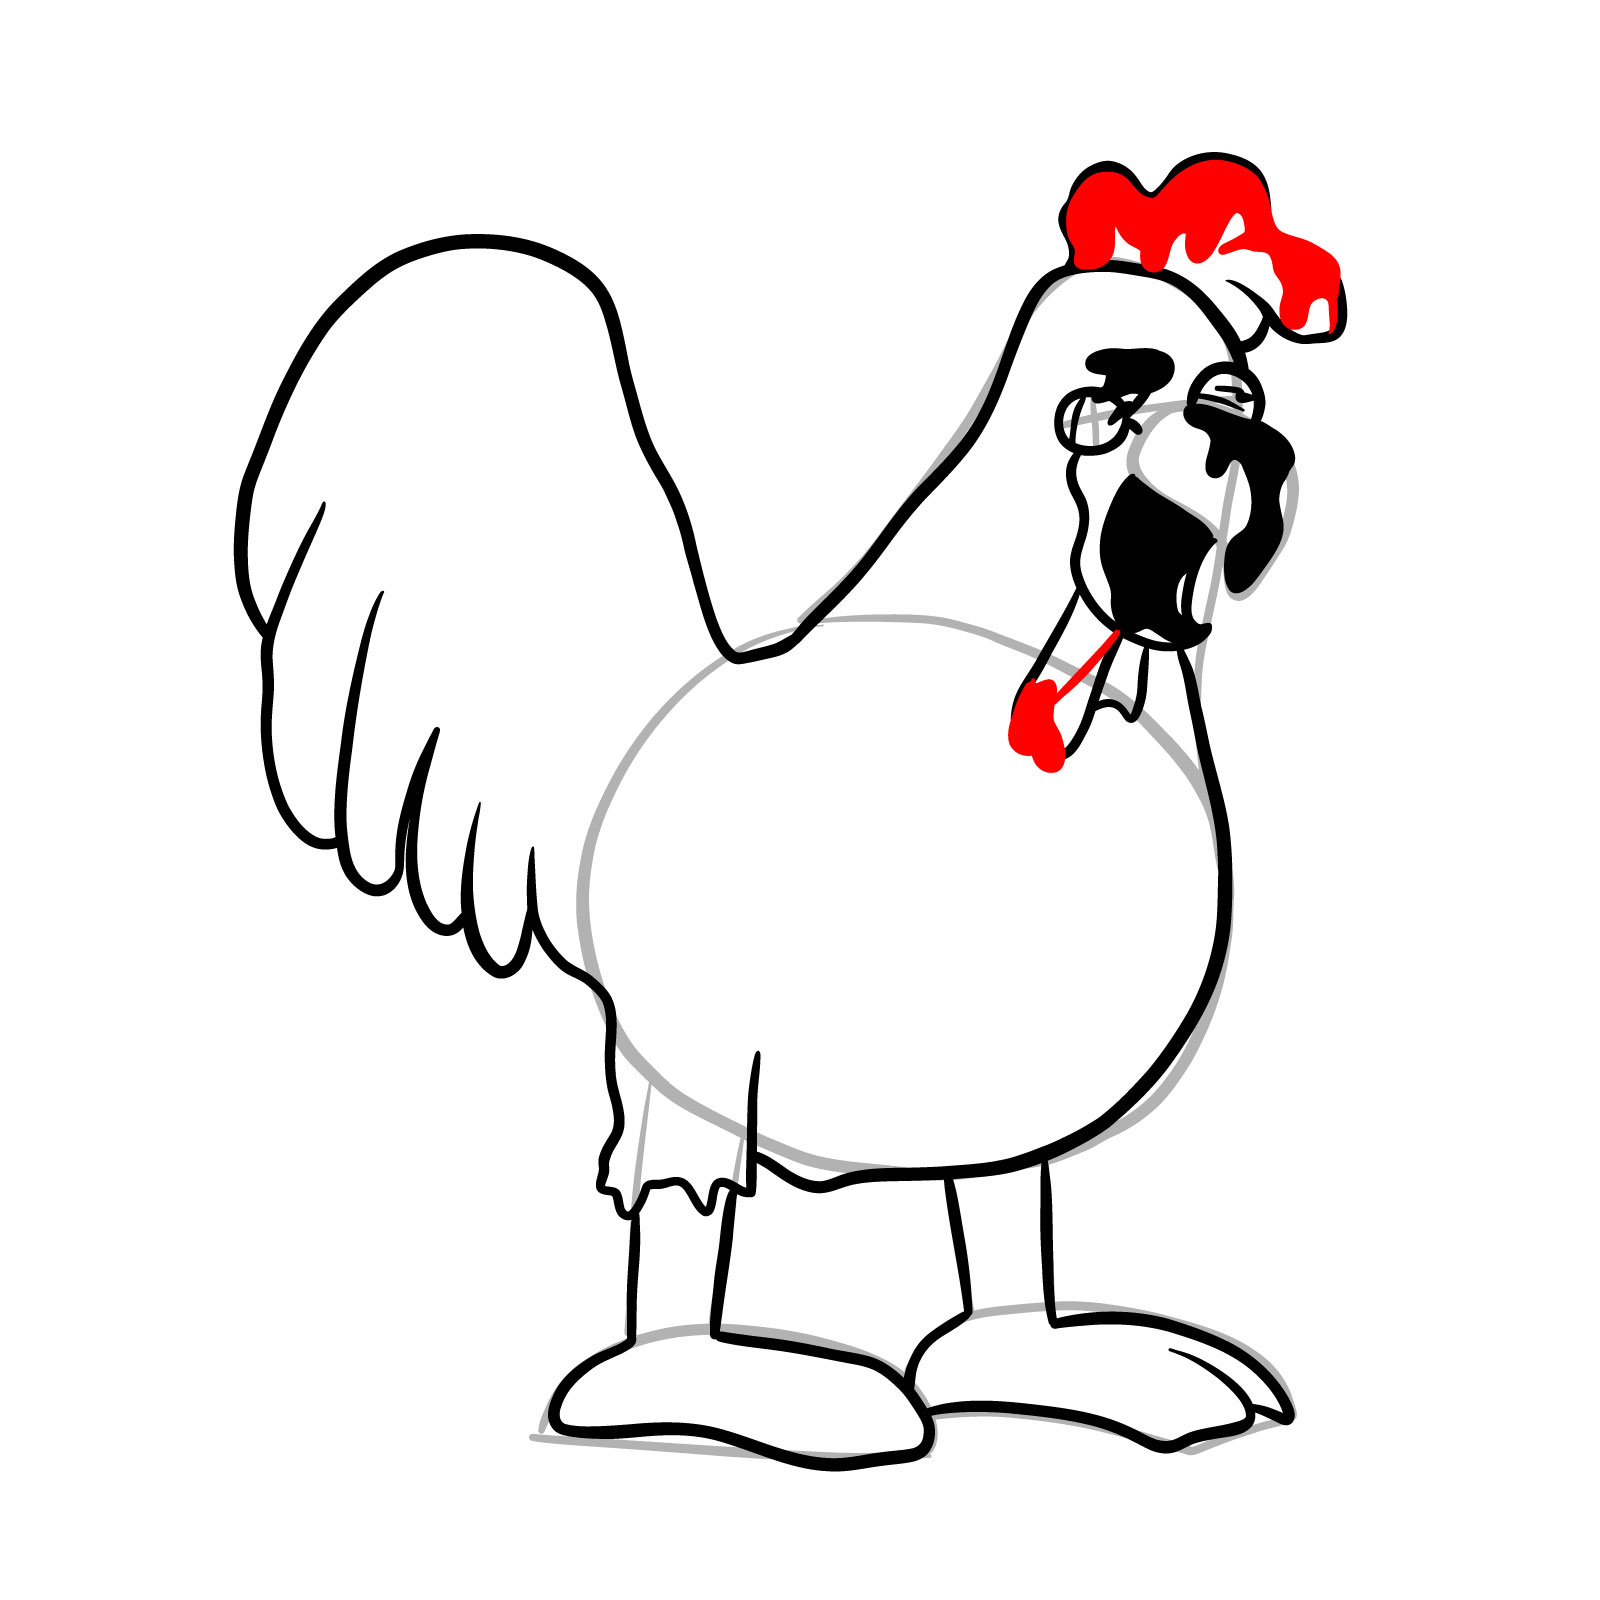 How to draw Corrupted Ernie the Chicken - step 18